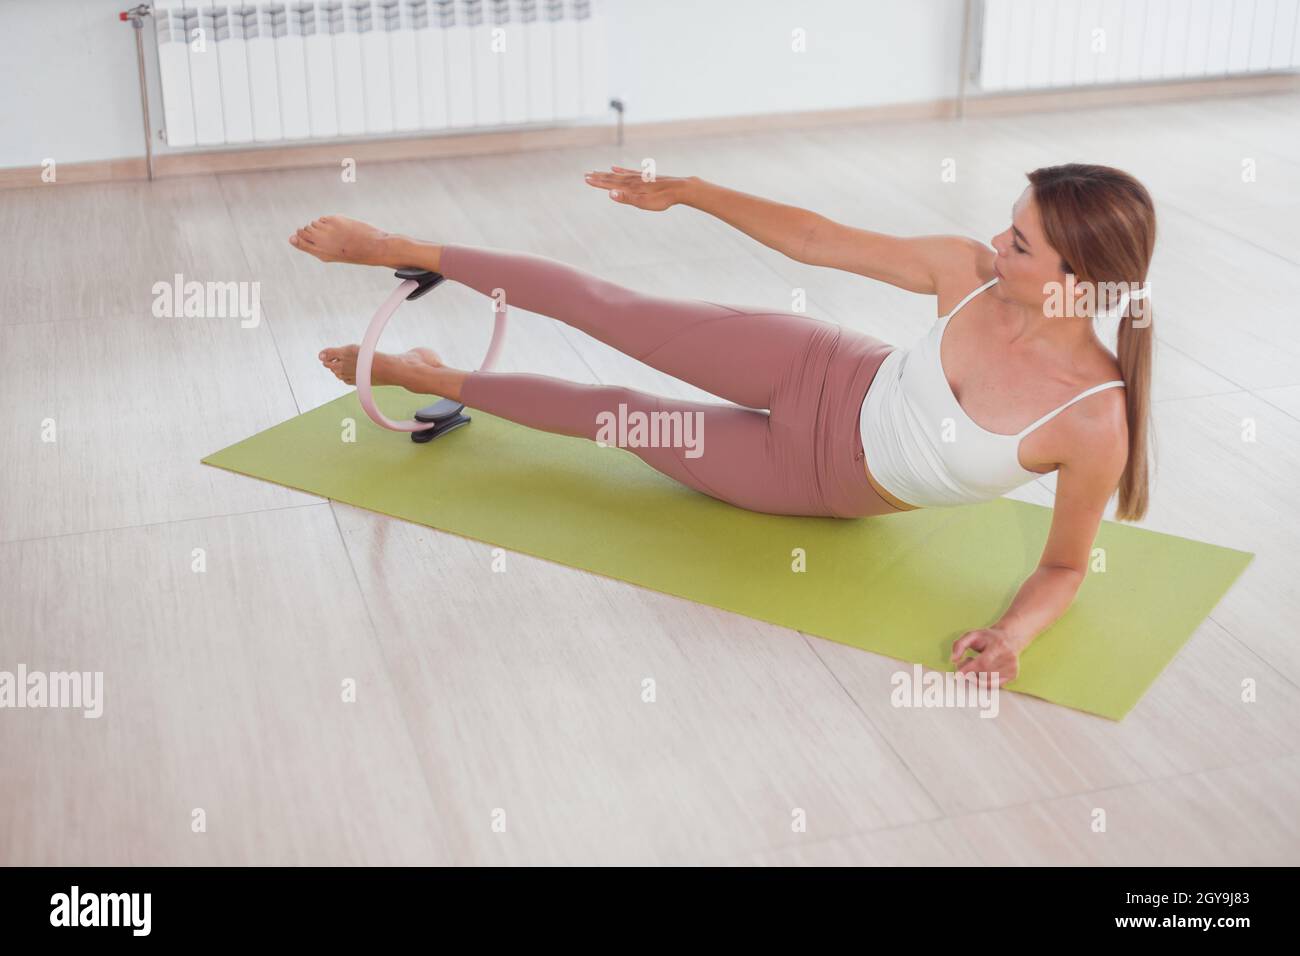 Playful Women Having Fun With Pilates Rings In Health Club Stock Photo -  Download Image Now - iStock